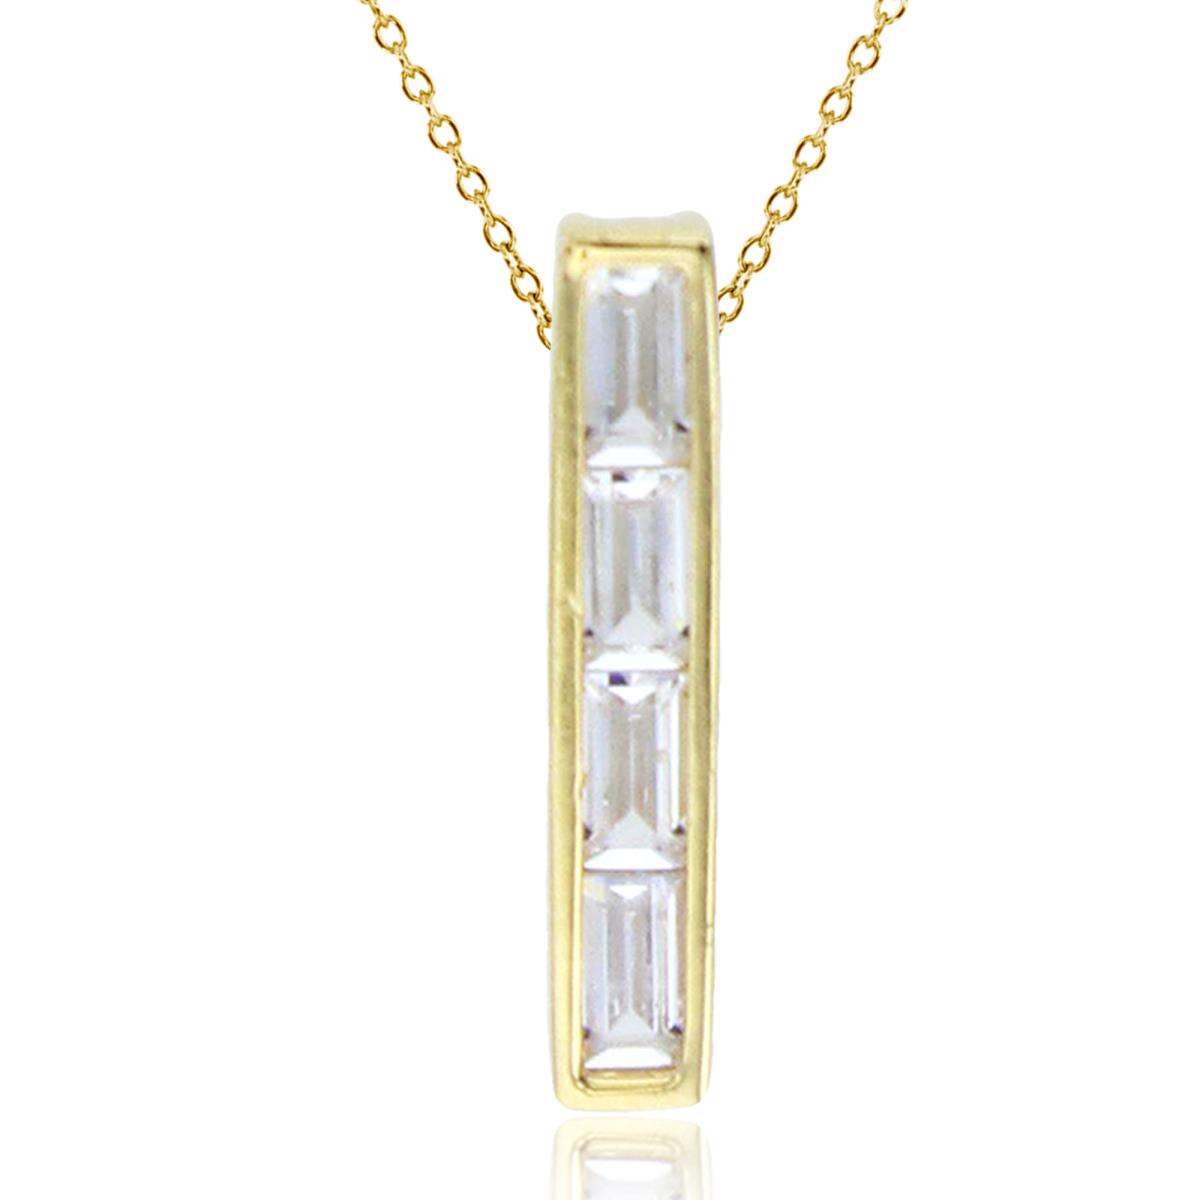 Sterling Silver+1Micron Yellow Gold 4.5x2.5mm SB CZ Channel Vertical Bar 18"Necklace